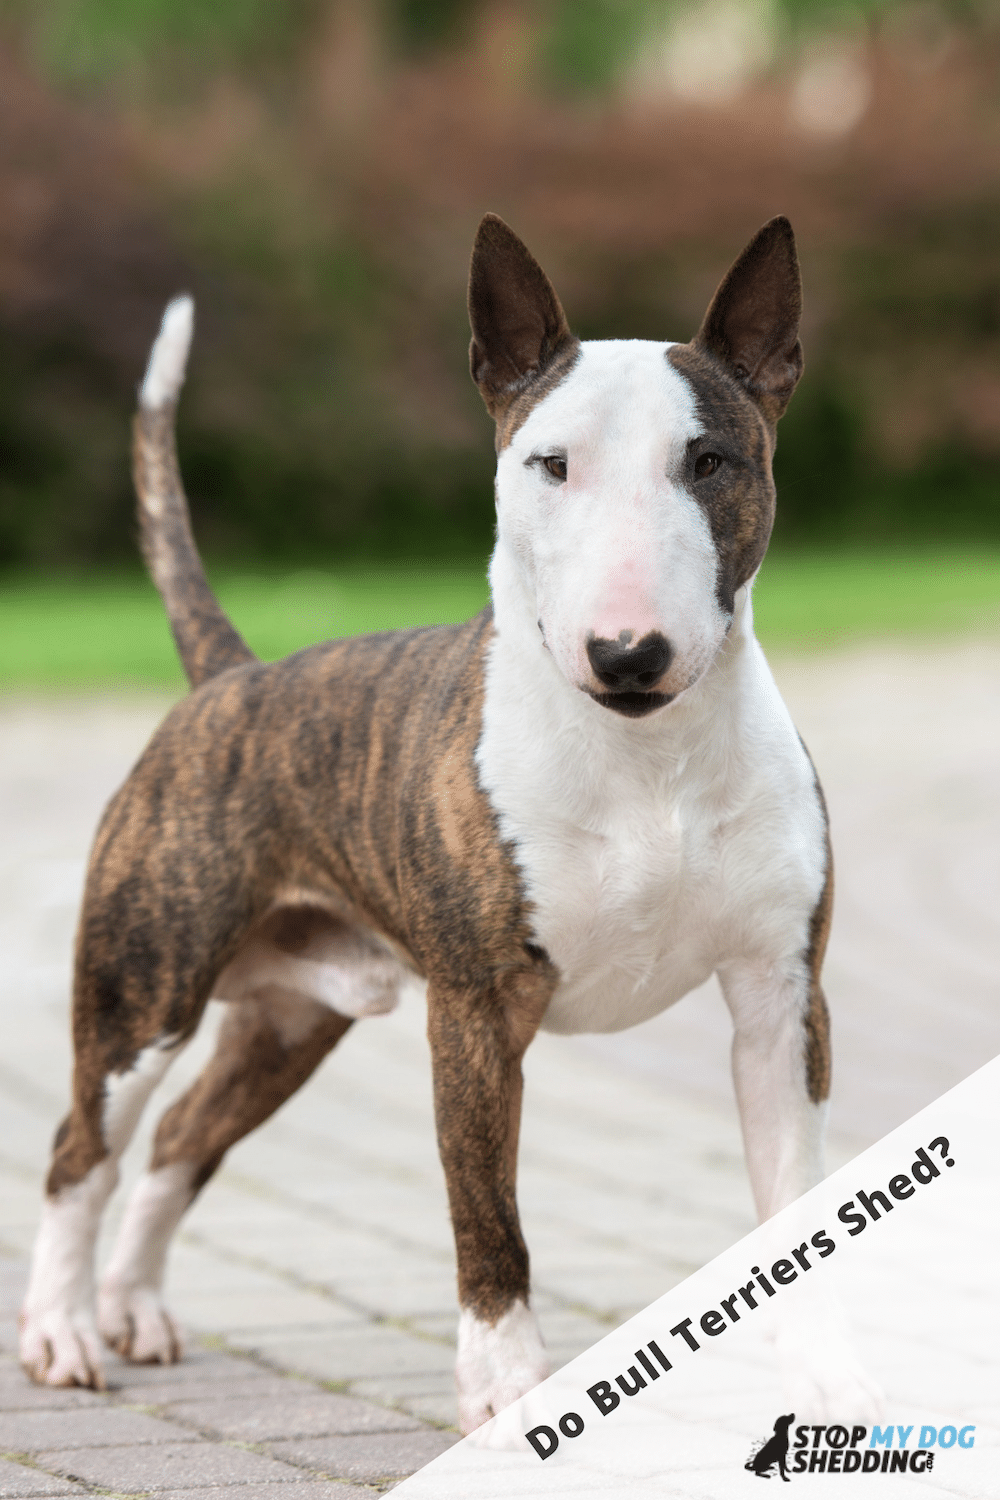 Do Bull Terriers Shed Much?